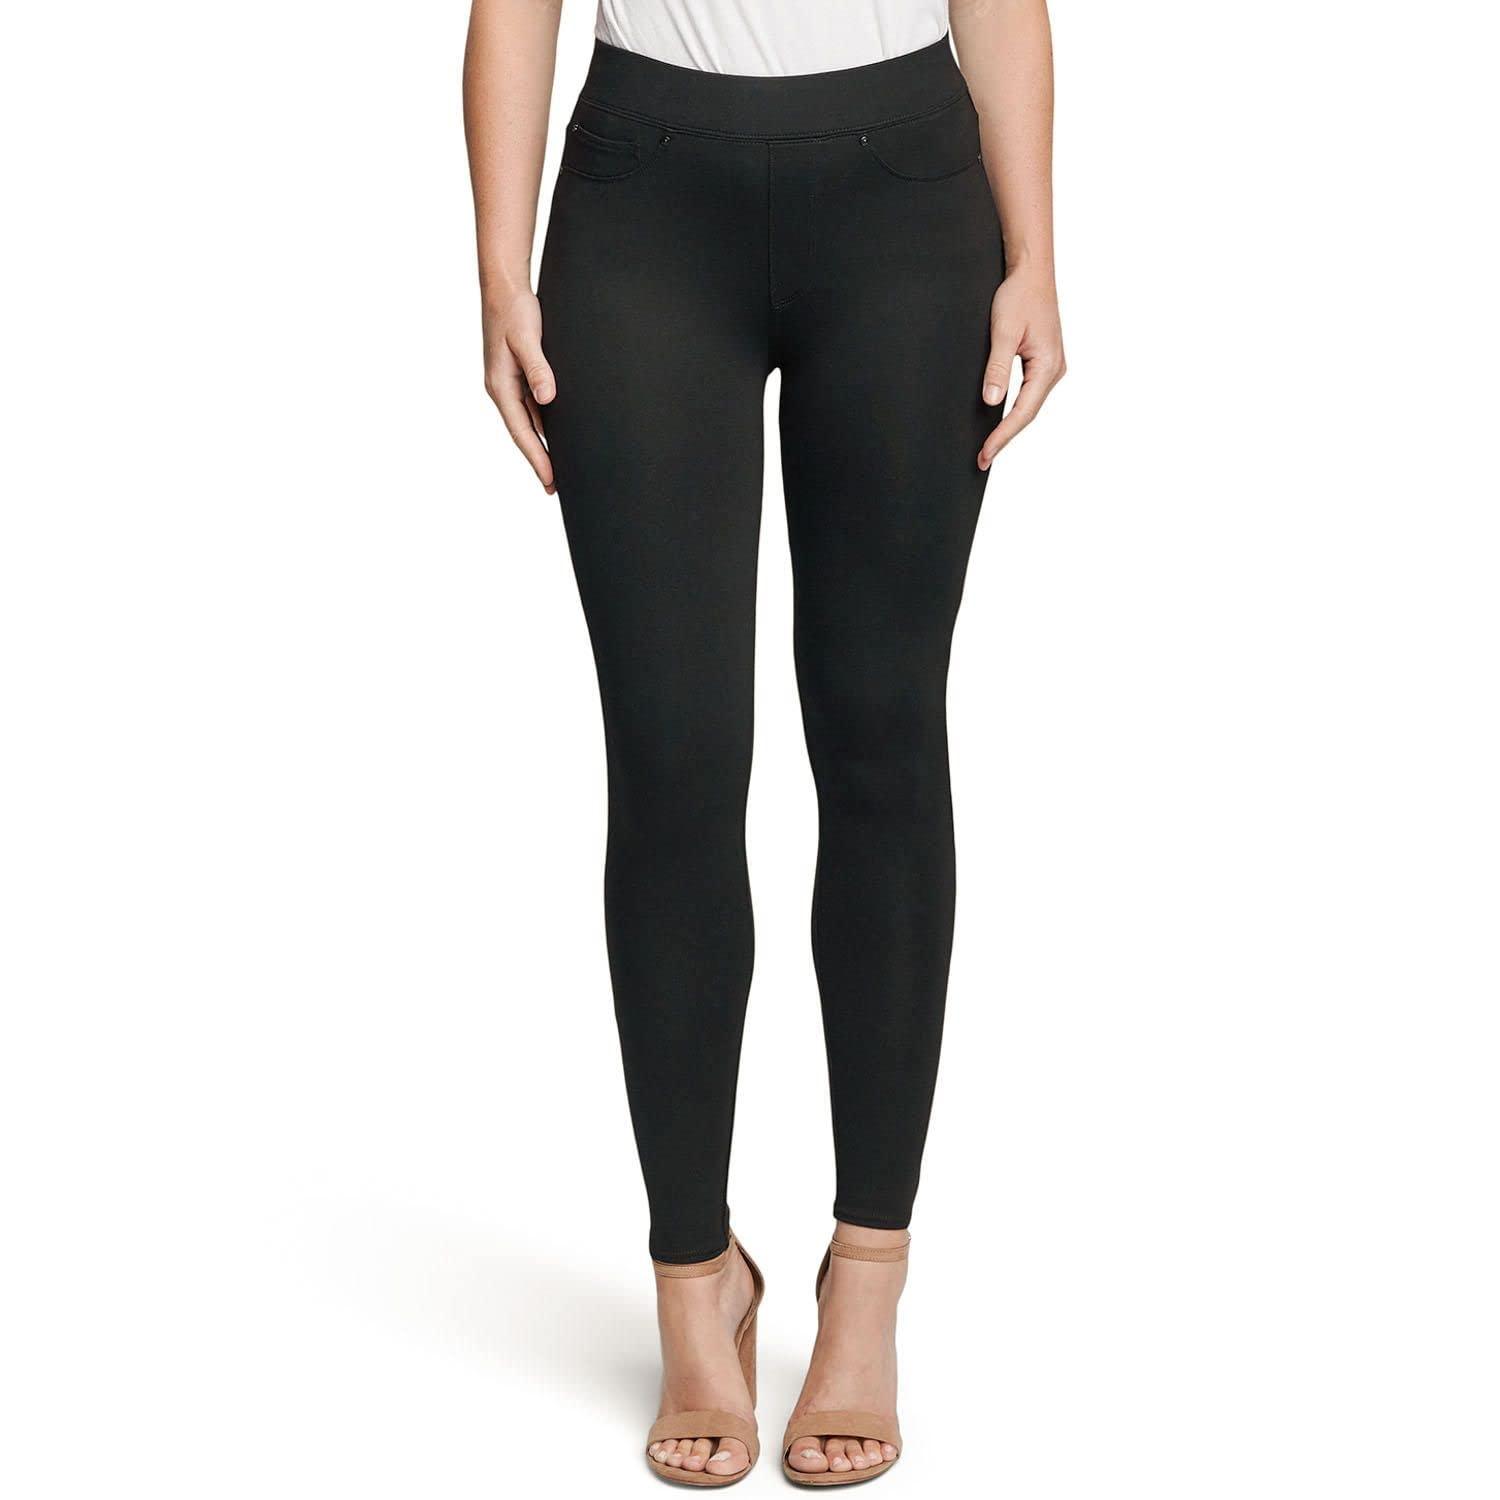 Seven7 4-WAY STRETCH PULL ON PONTE LEGGINGSS